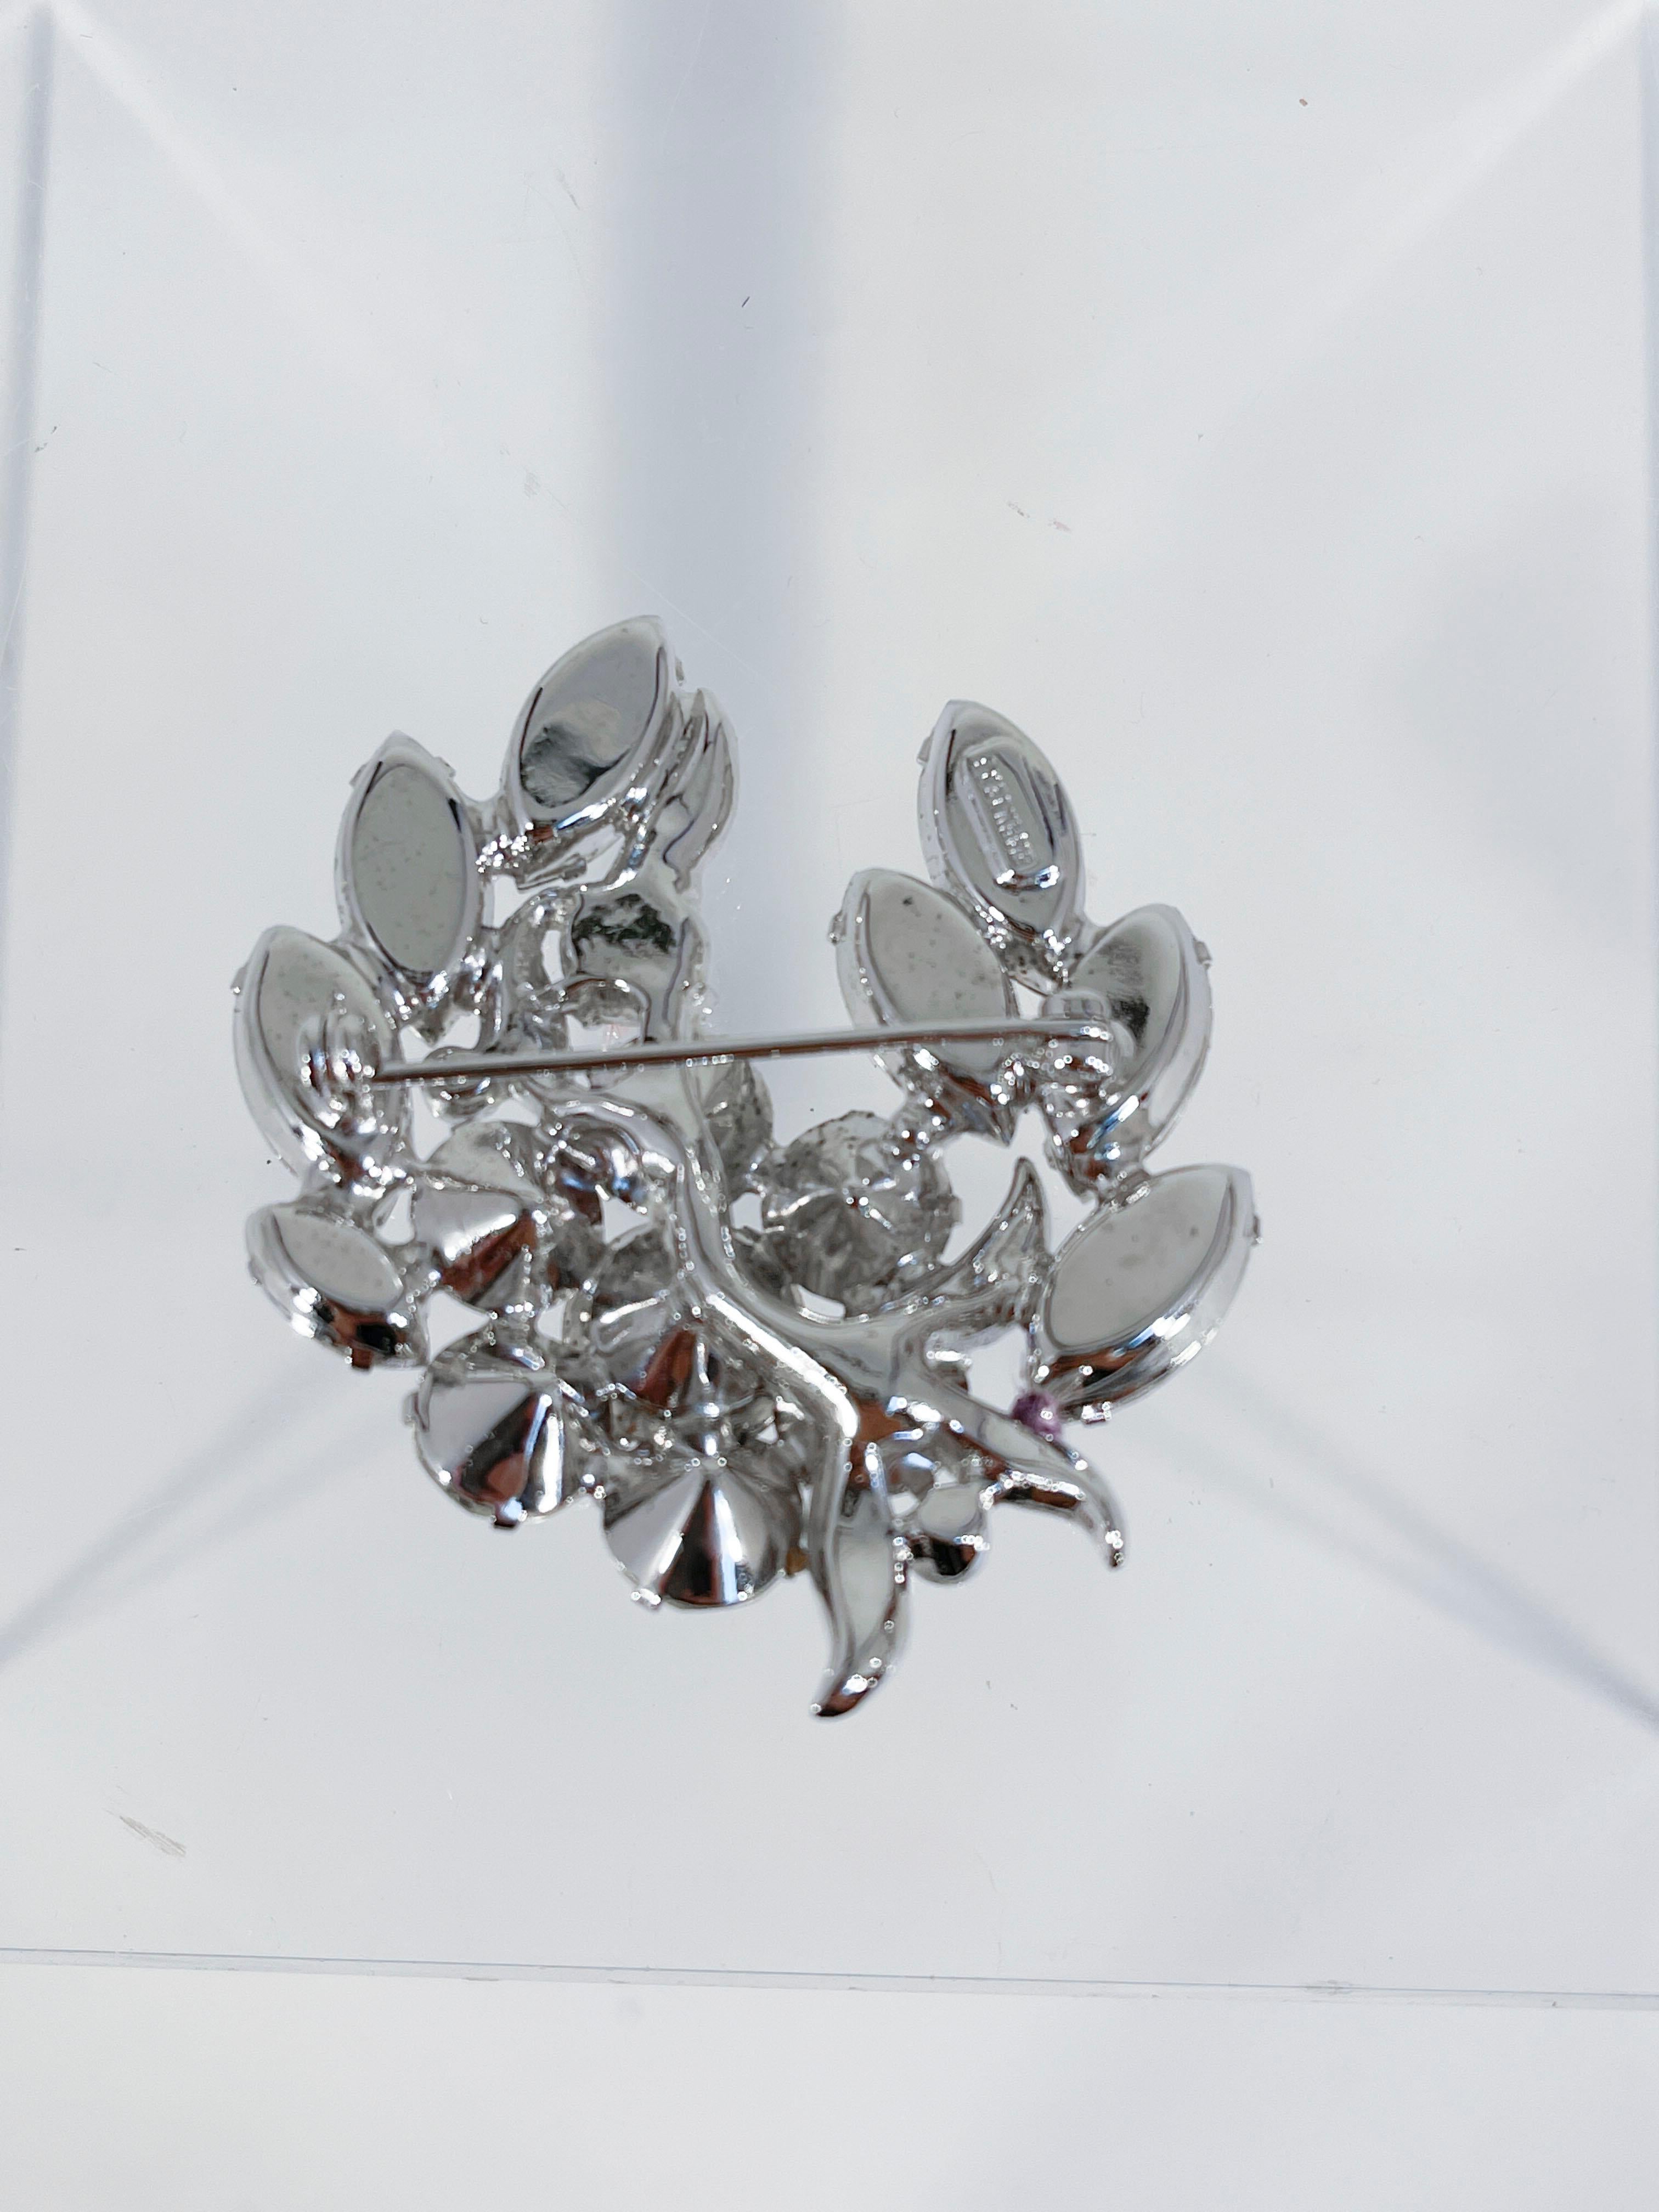 1950s Eisenberg brilliant clear multi-cut rhinestone brooch in a natural foliage motif. The back has a long and standard brooch pin and lock.